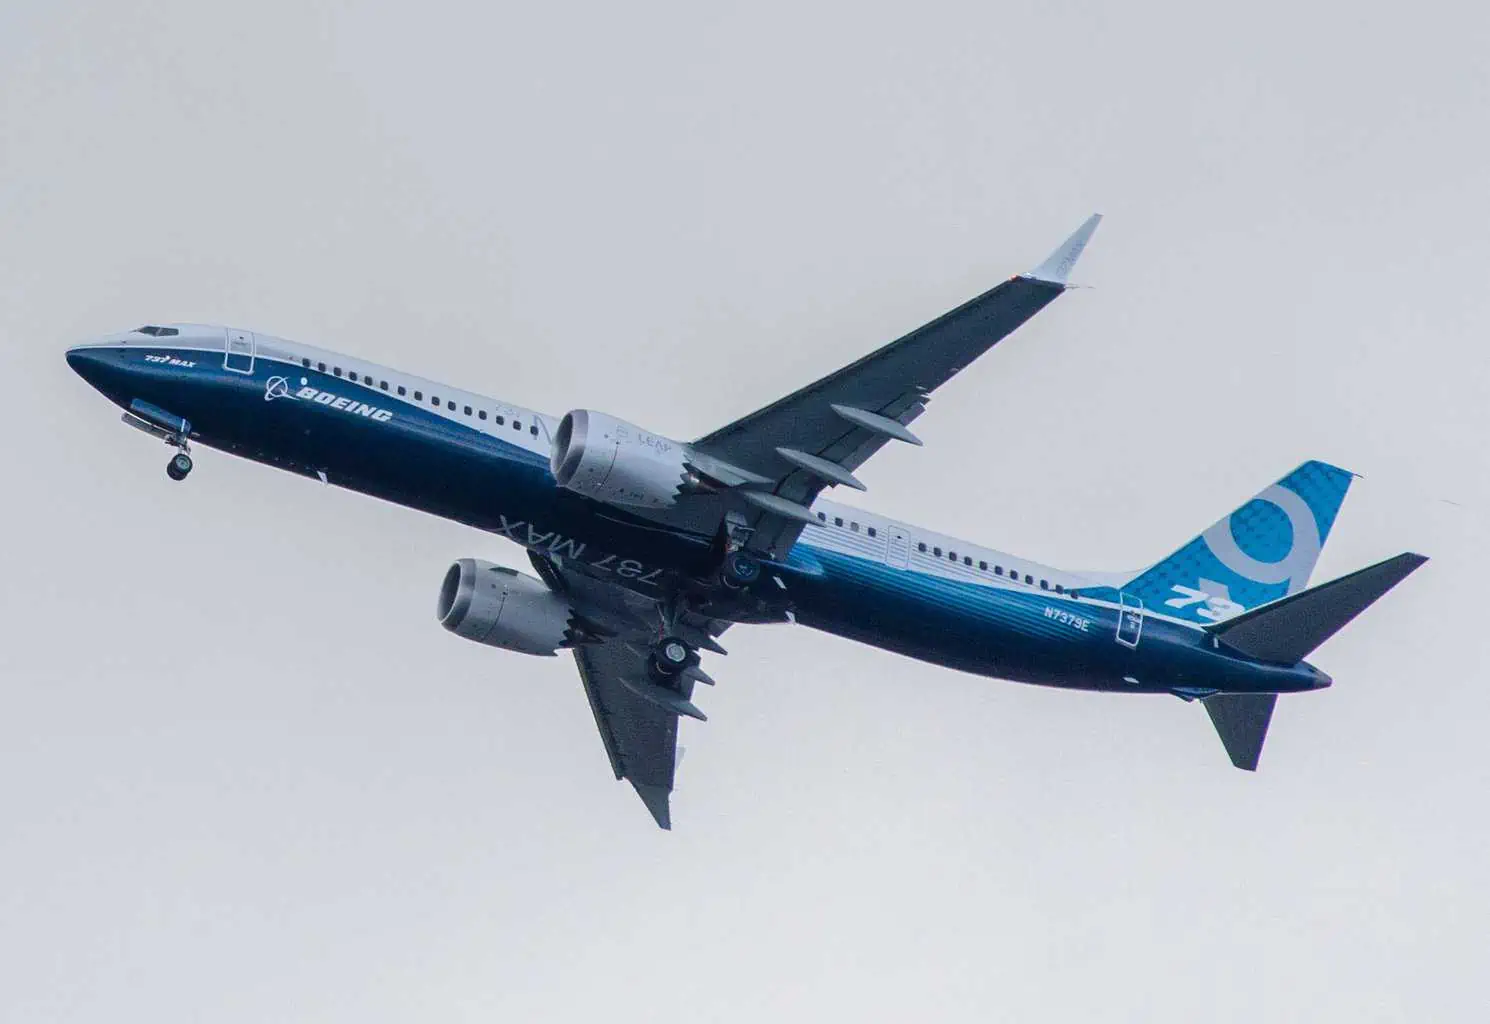 How to Check if You Are Booked on a Boeing 737 Max Airplane